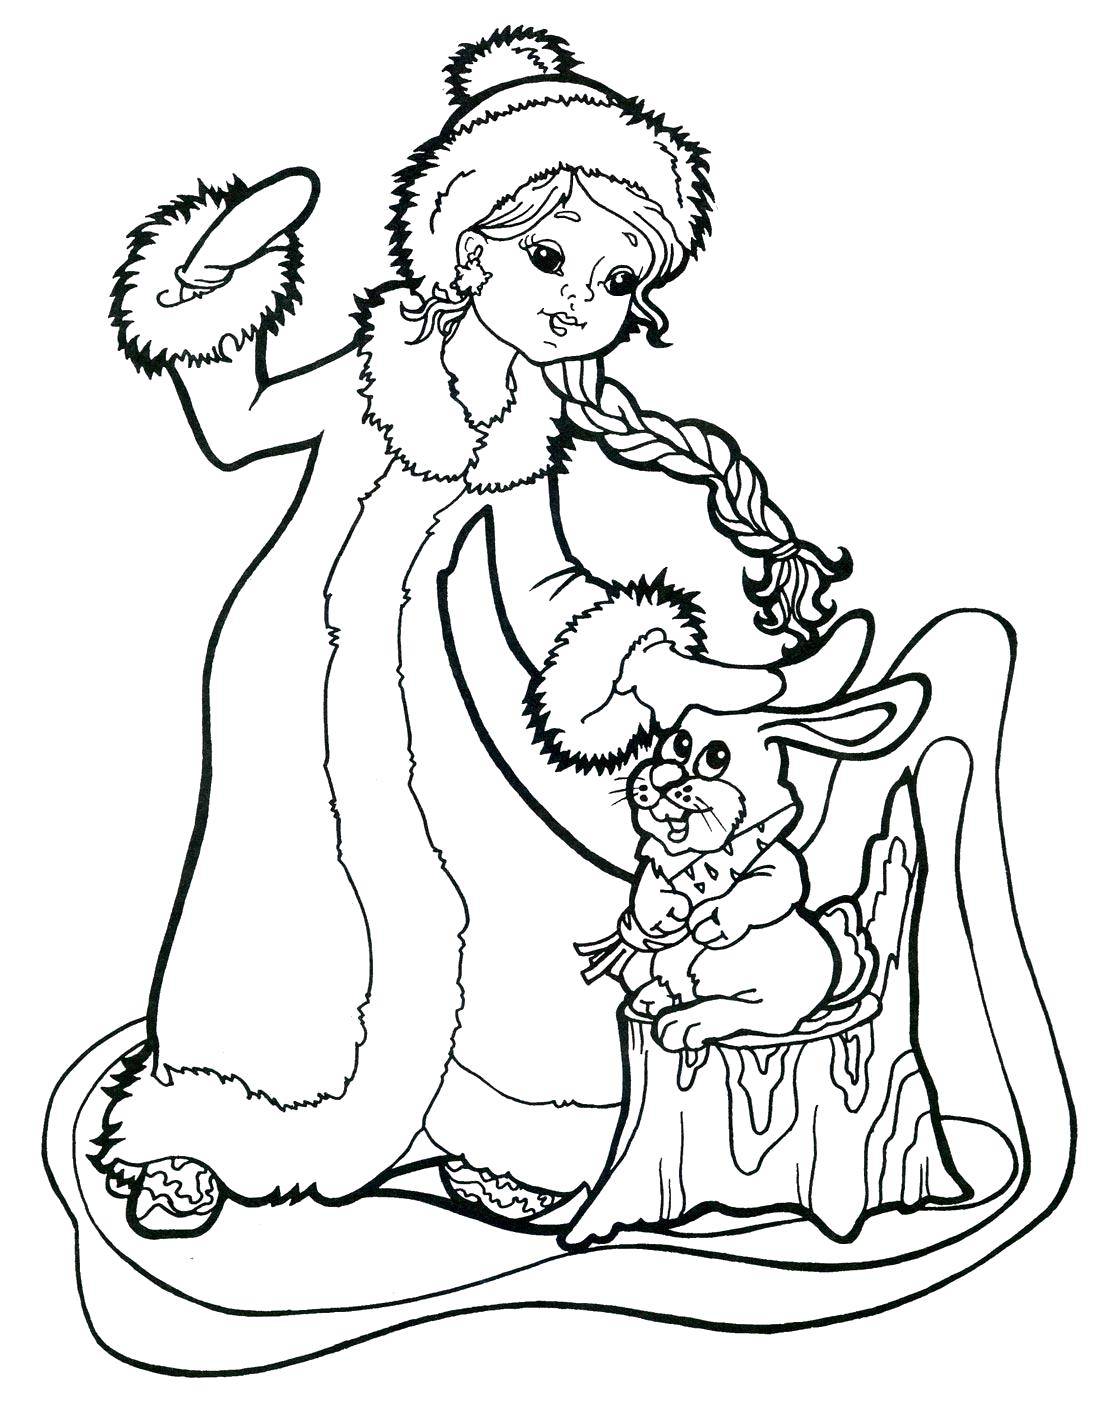 Coloring Snow maiden with Bunny. Category maiden. Tags:  Snow maiden, winter, New Year.